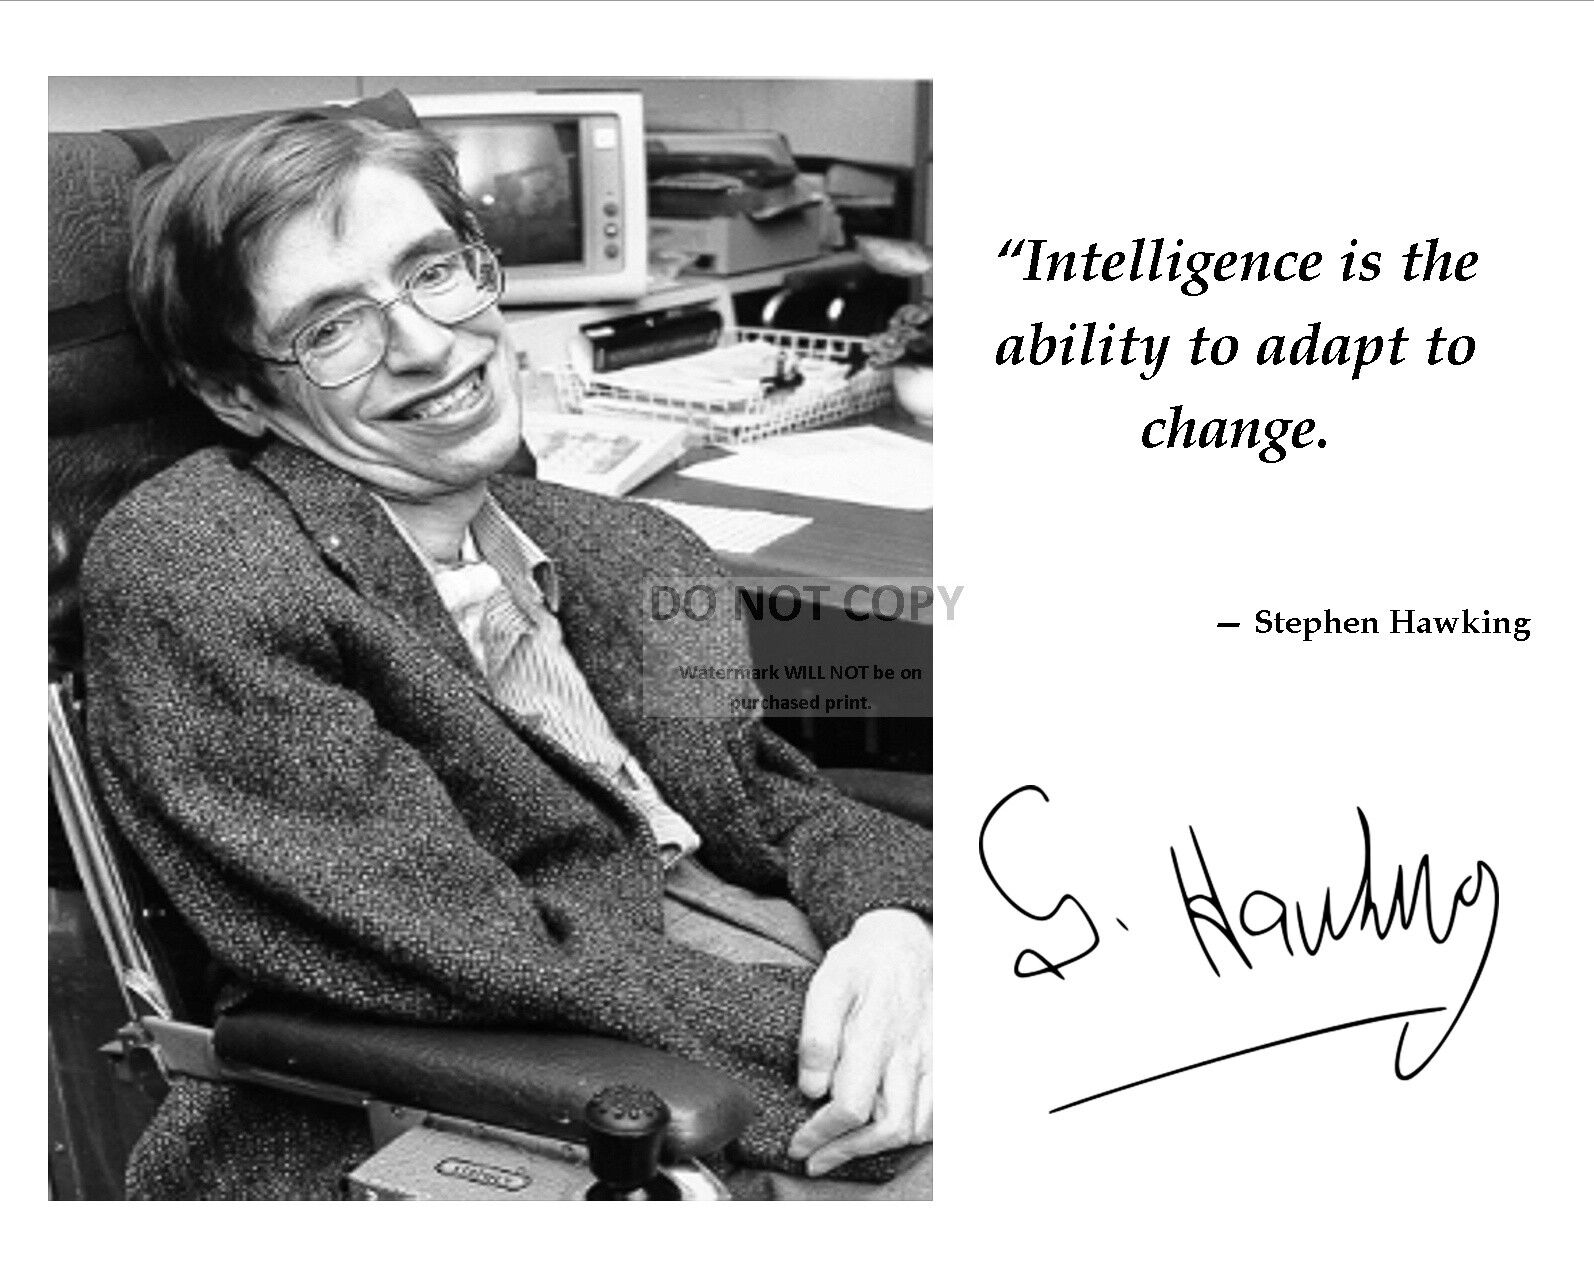 STEPHEN HAWKING QUOTE WITH FACSIMILE AUTOGRAPH - 8X10 or 11X14 PHOTO (AZ904)